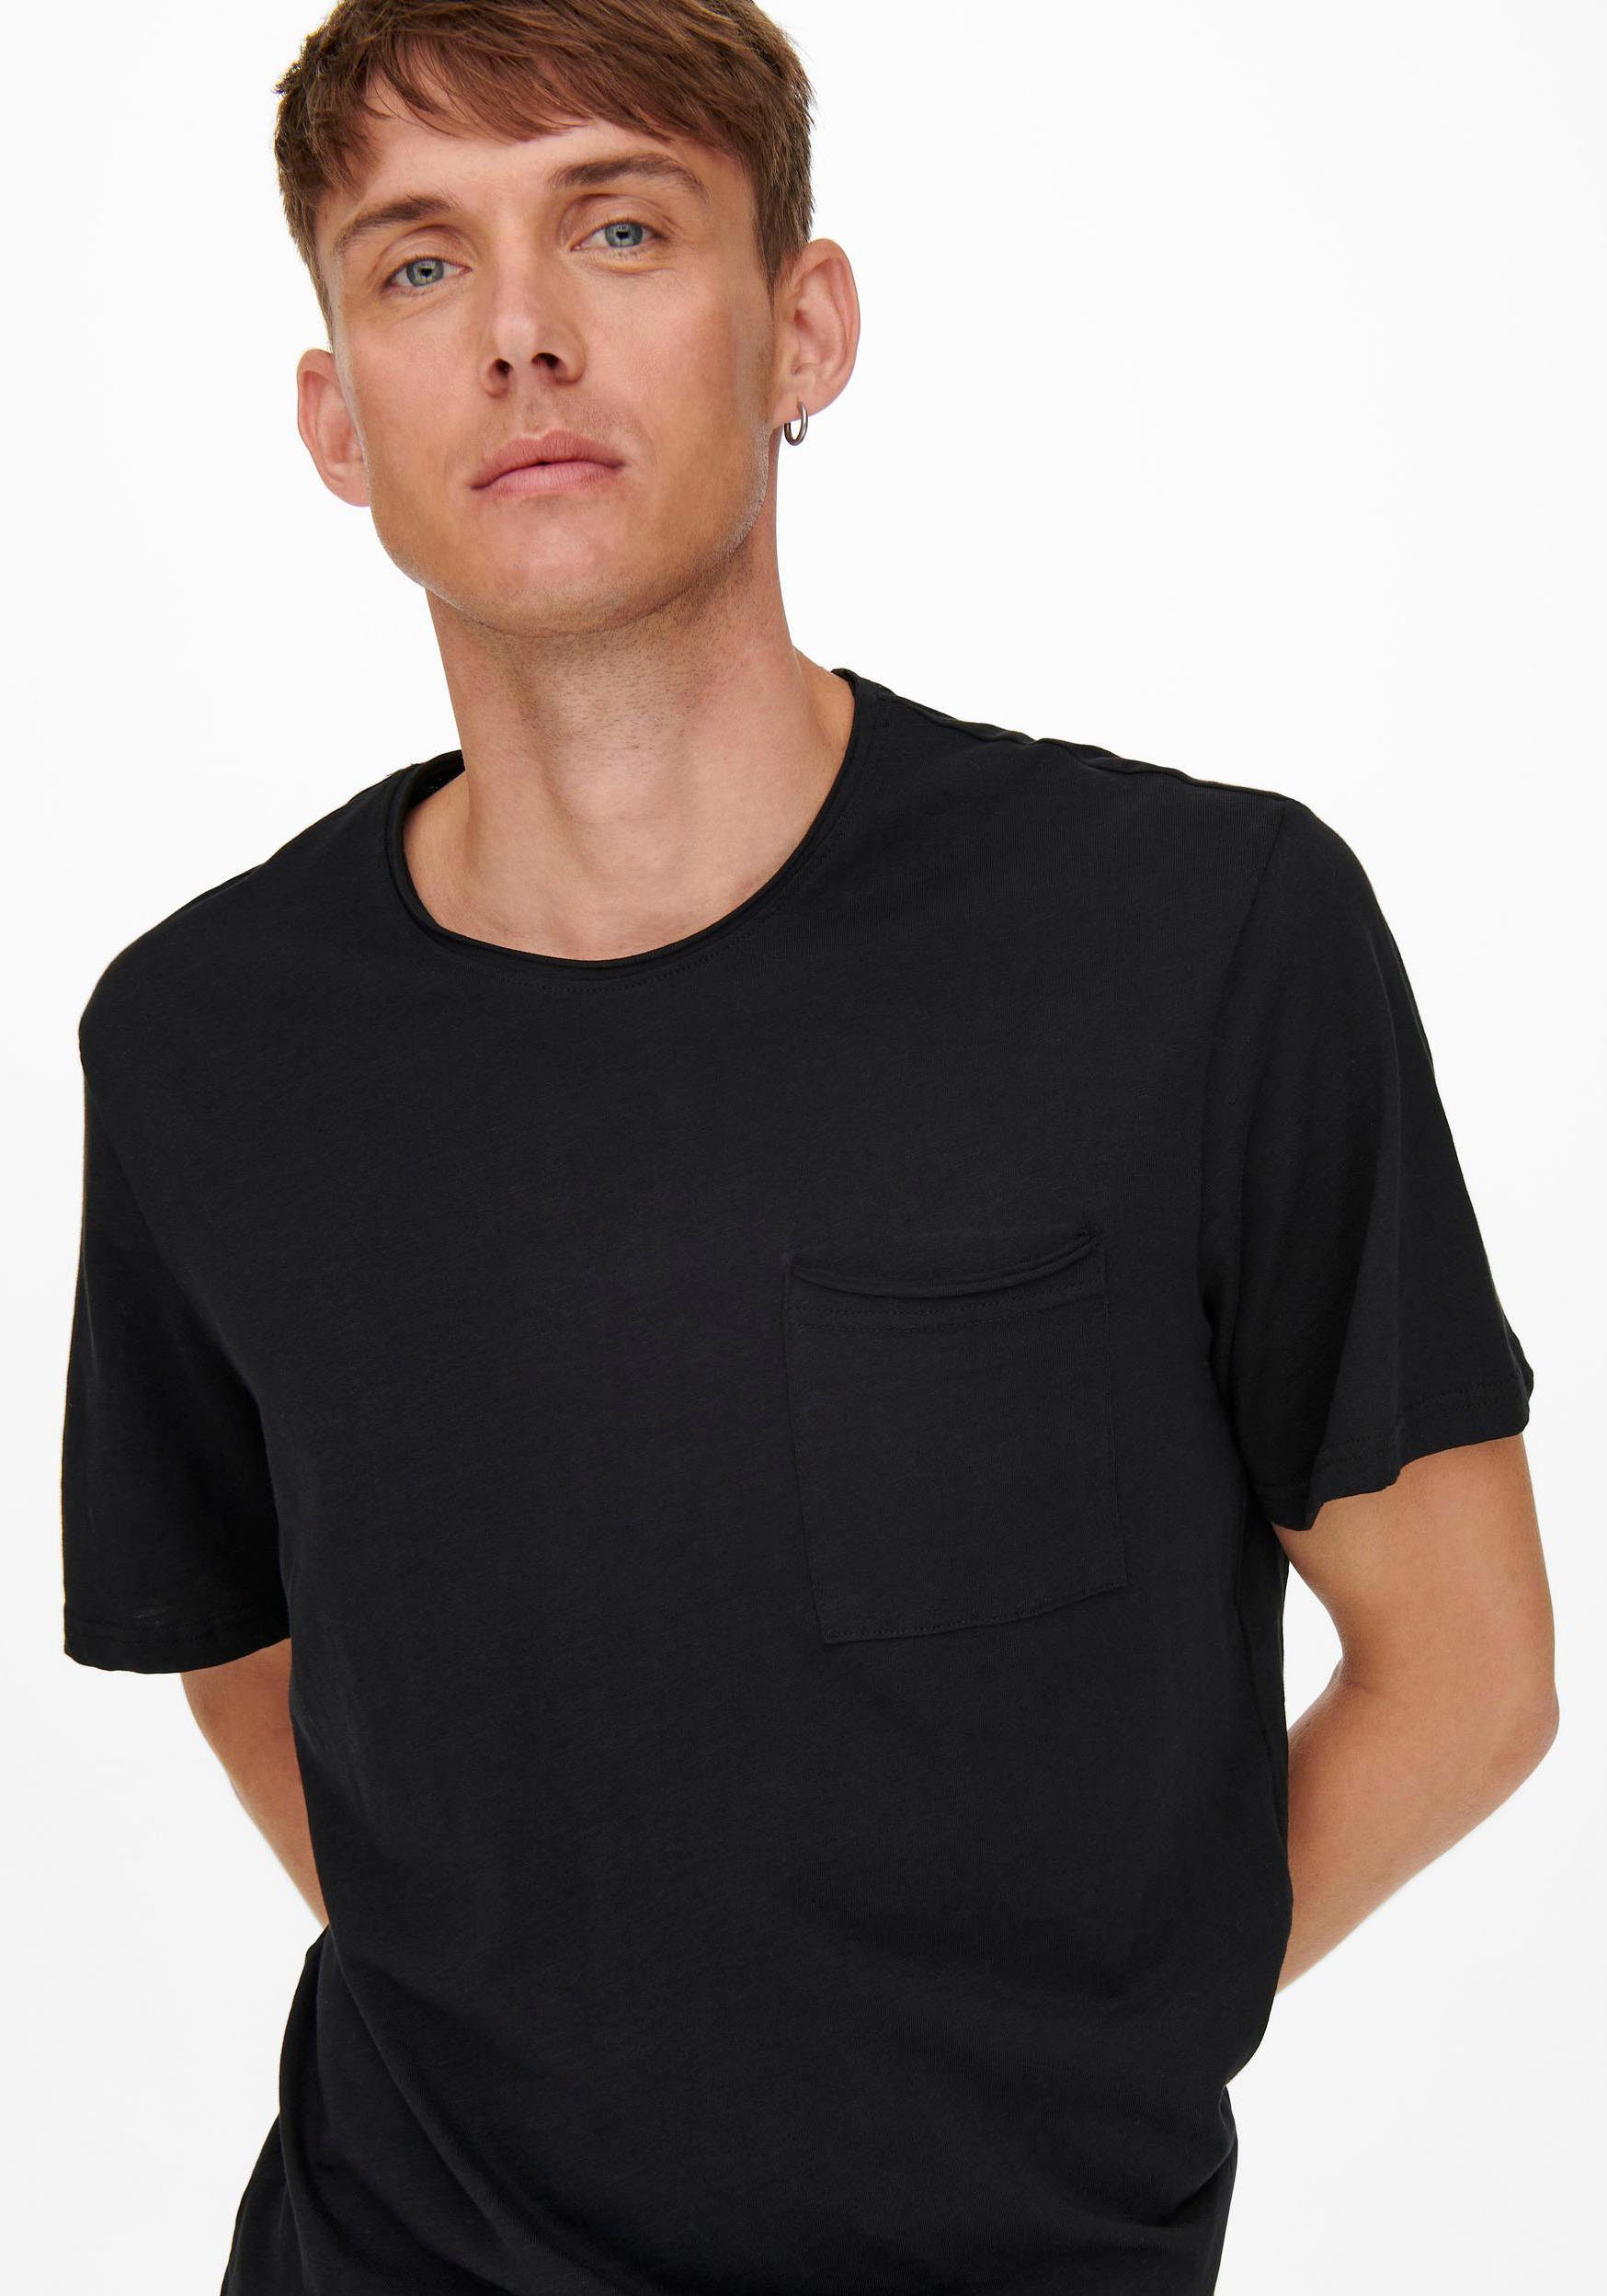 schwarz & SONS T-Shirt ROY ONLY